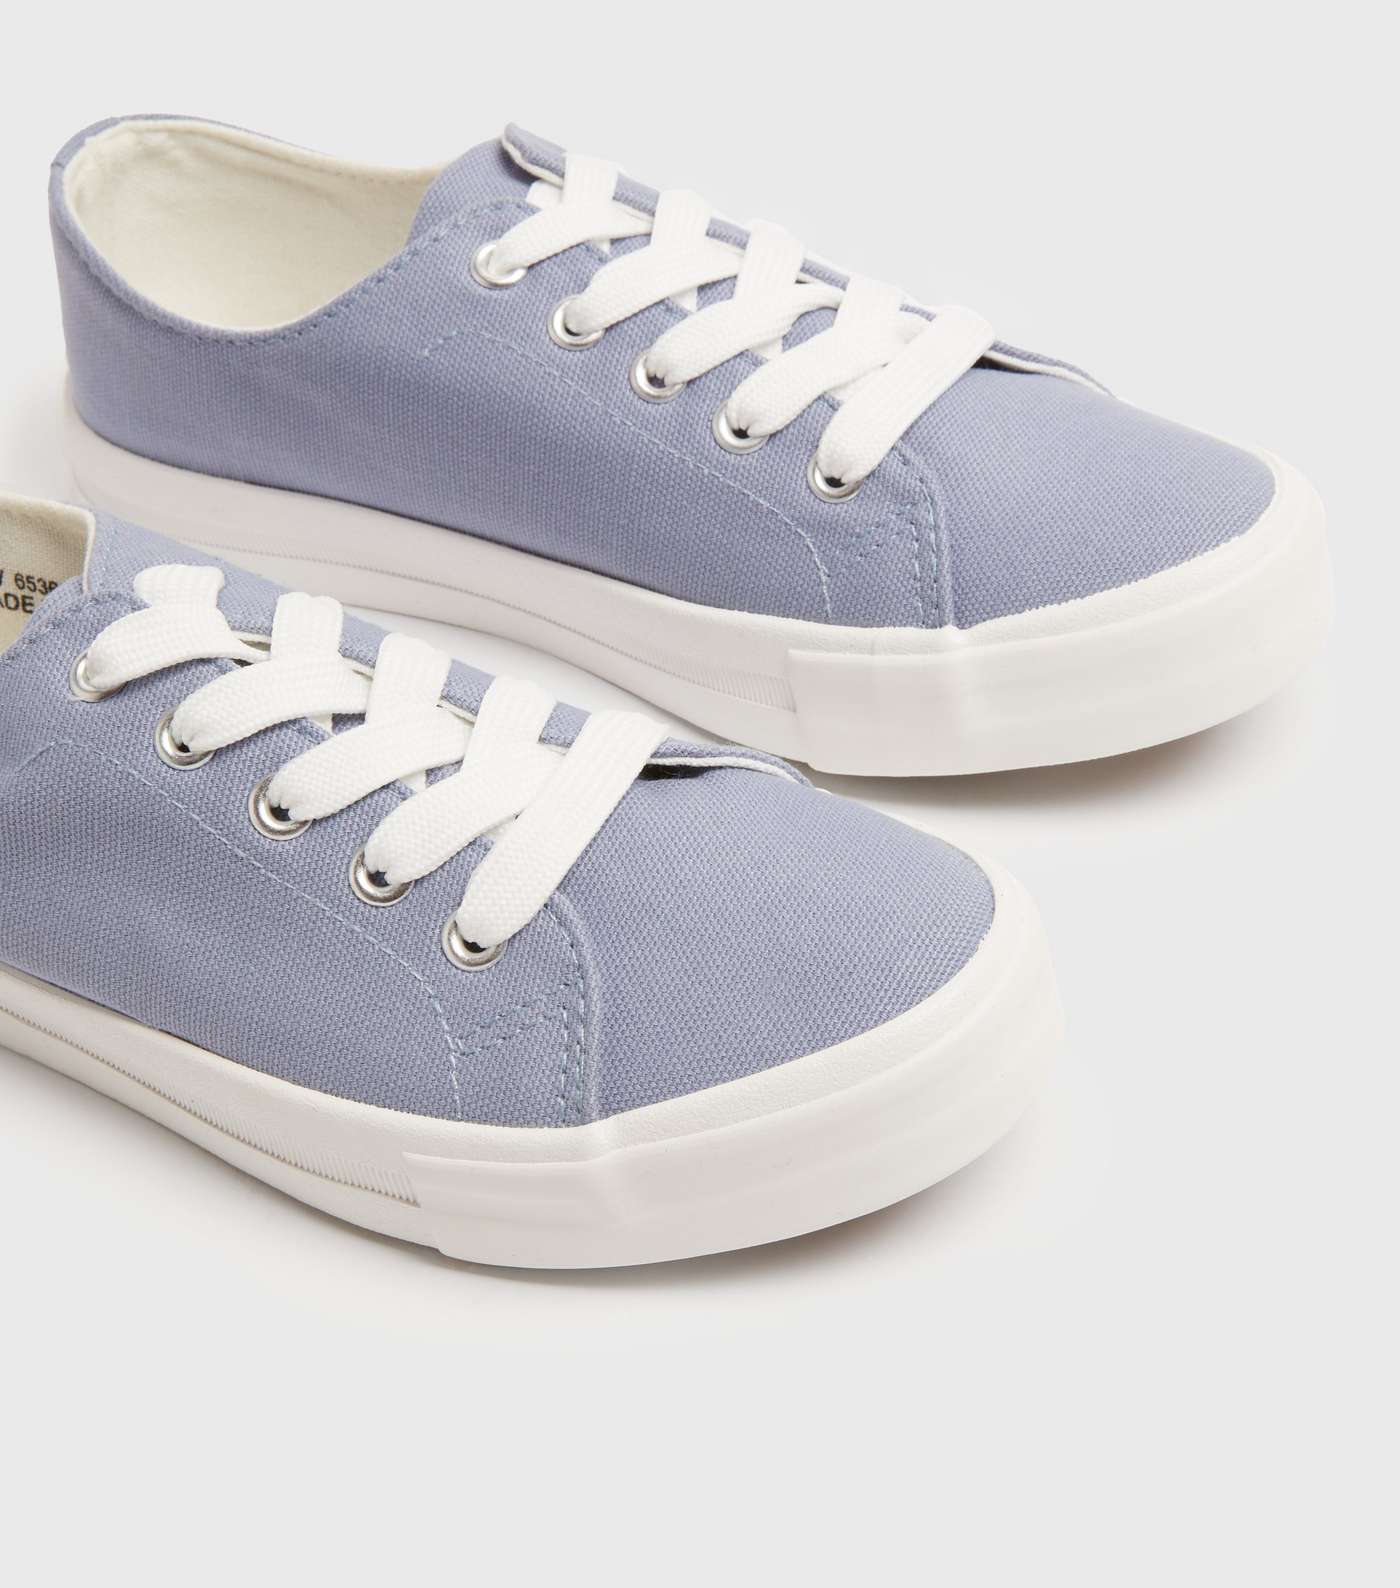 Girls Pale Blue Canvas Lace Up Trainers Image 4